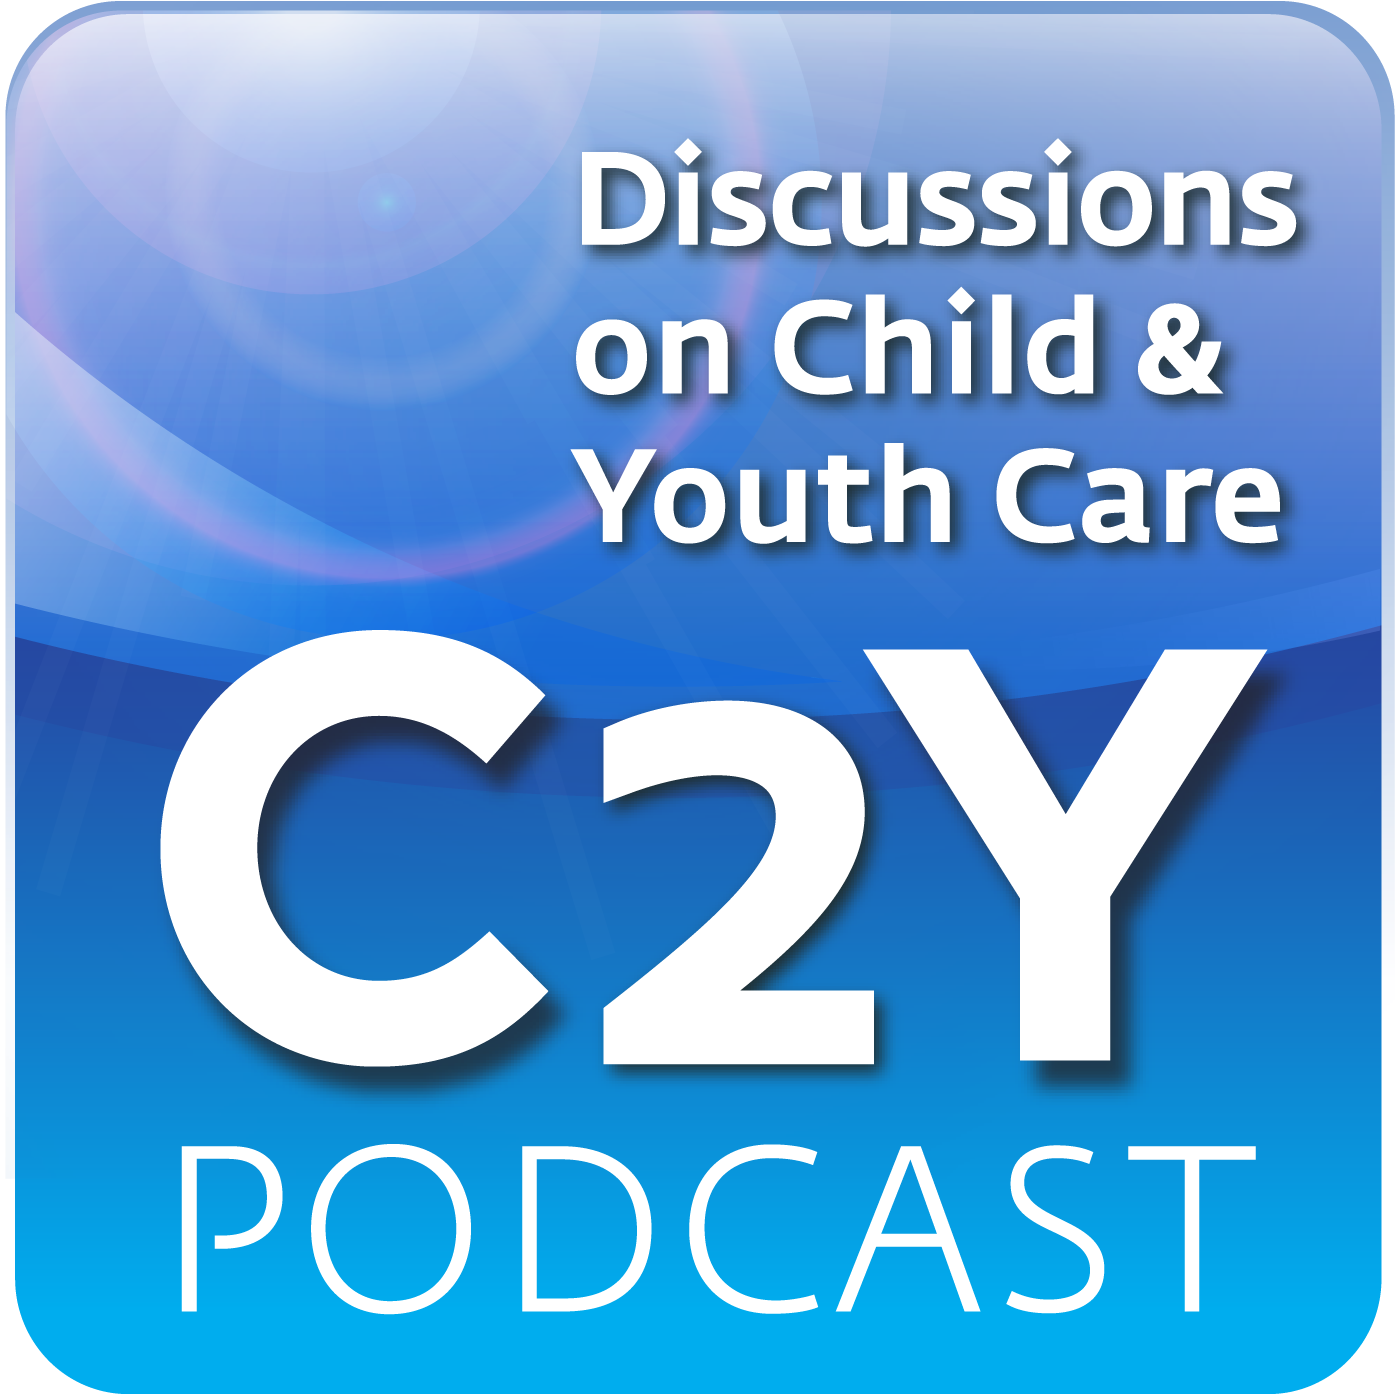 Videos on Working With Children and Youth: Children &amp; Youth in Care